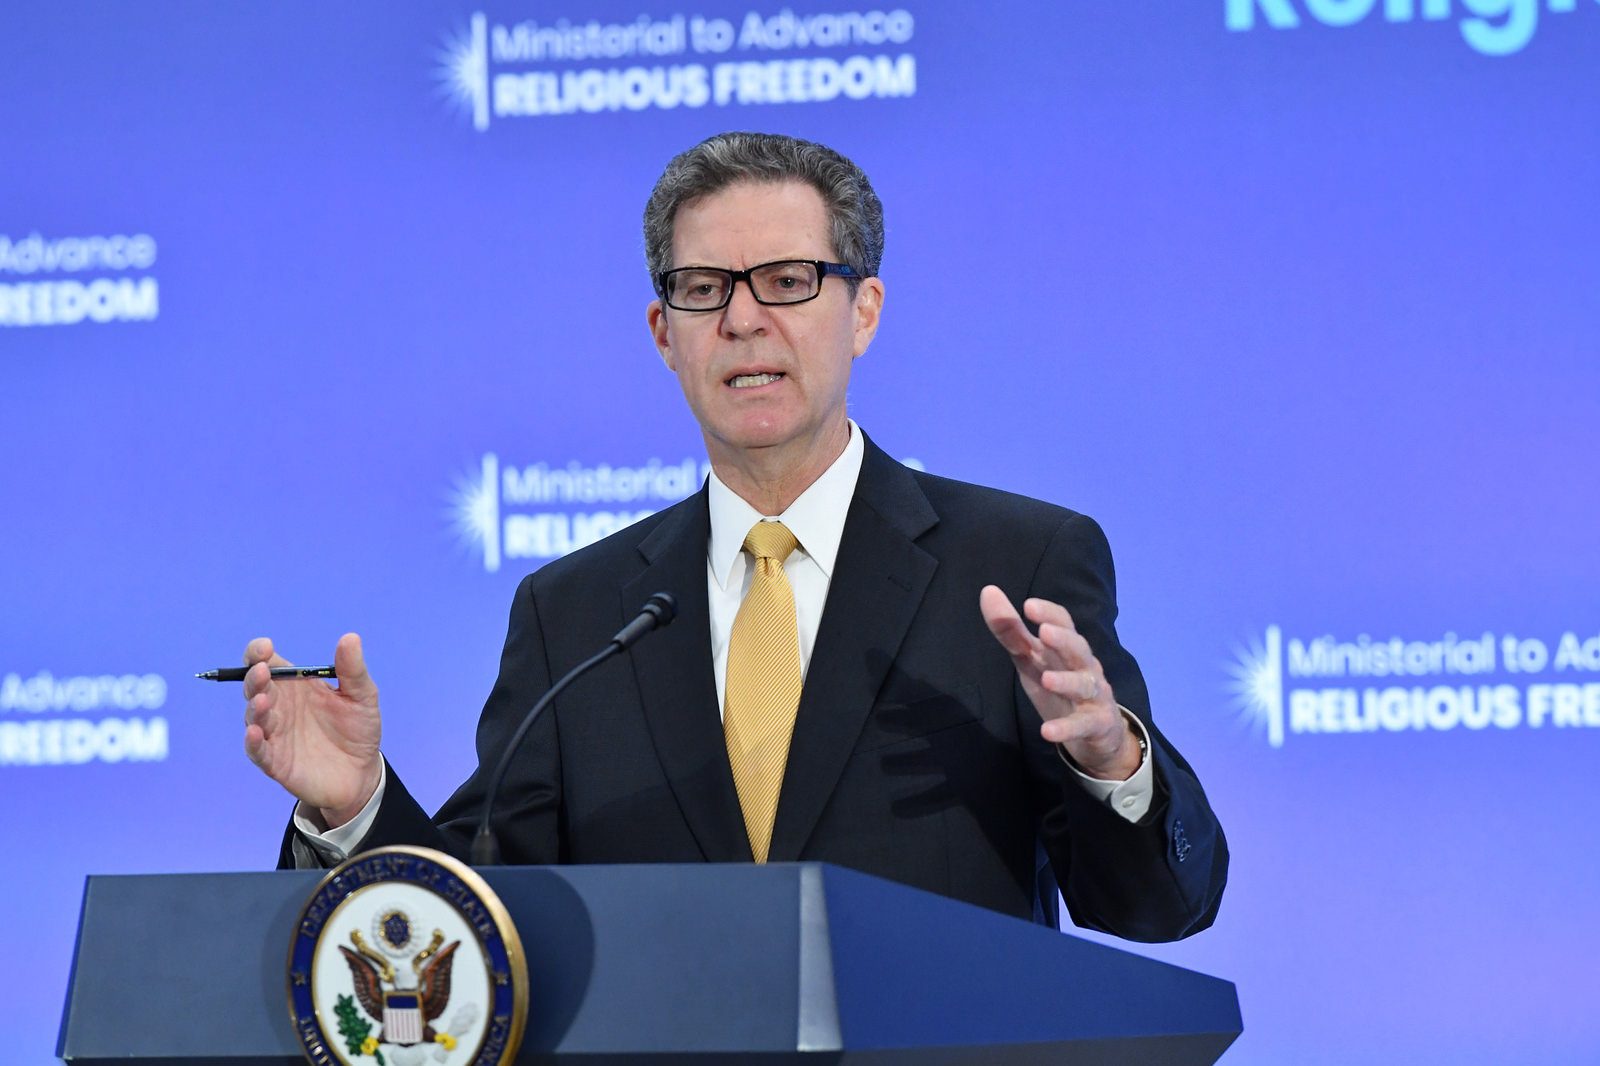 Dispatch from the Ministerial to Advance Religious Freedom